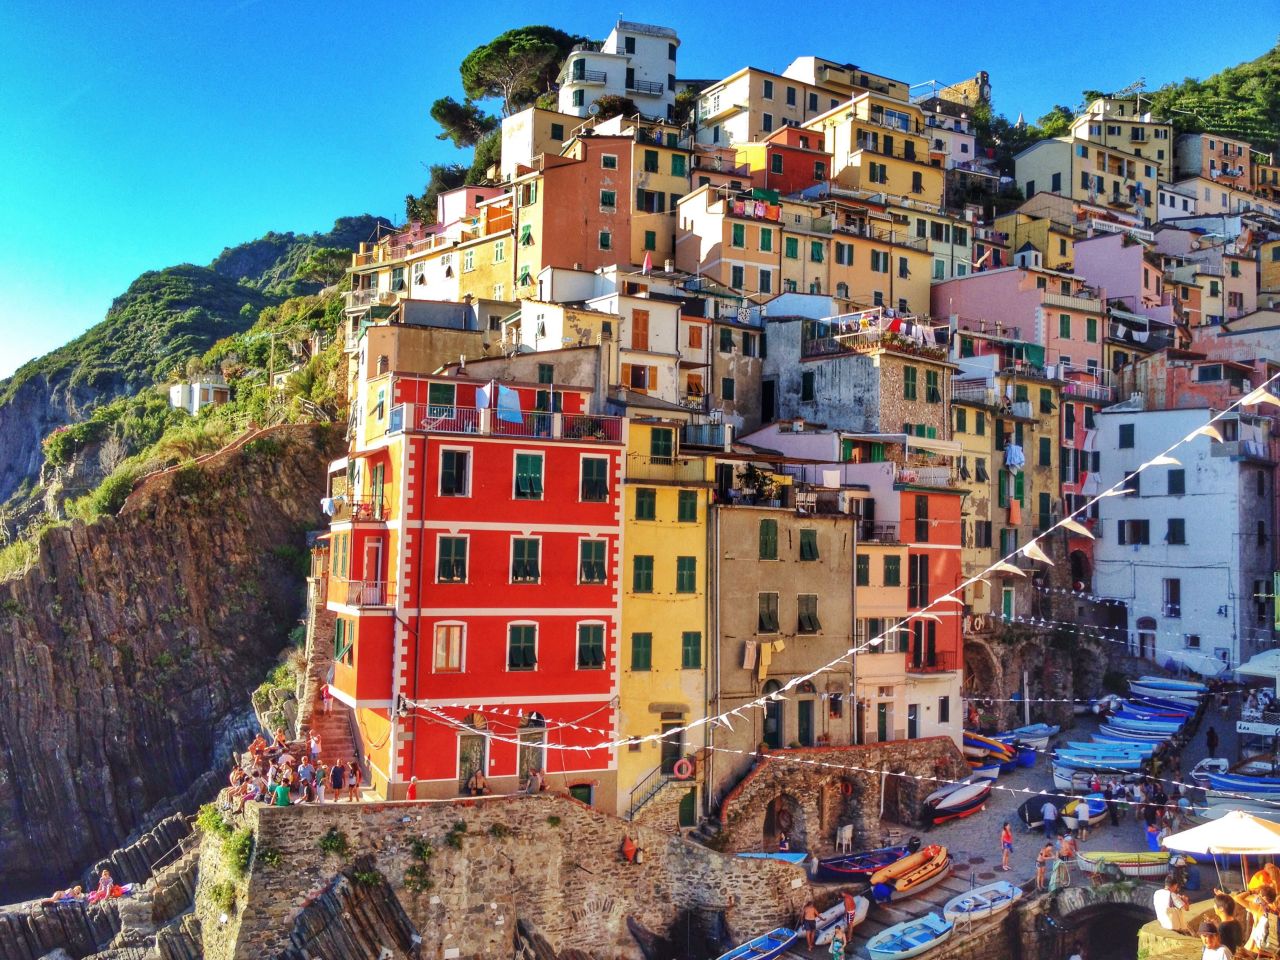 Cinque Terre is a string of beautifully colored fishing villages constructed on the Italian Riviera. "It turned out to be a really magical place," said <a href="http://ireport.cnn.com/docs/DOC-1220422">Brian Beard.</a> 